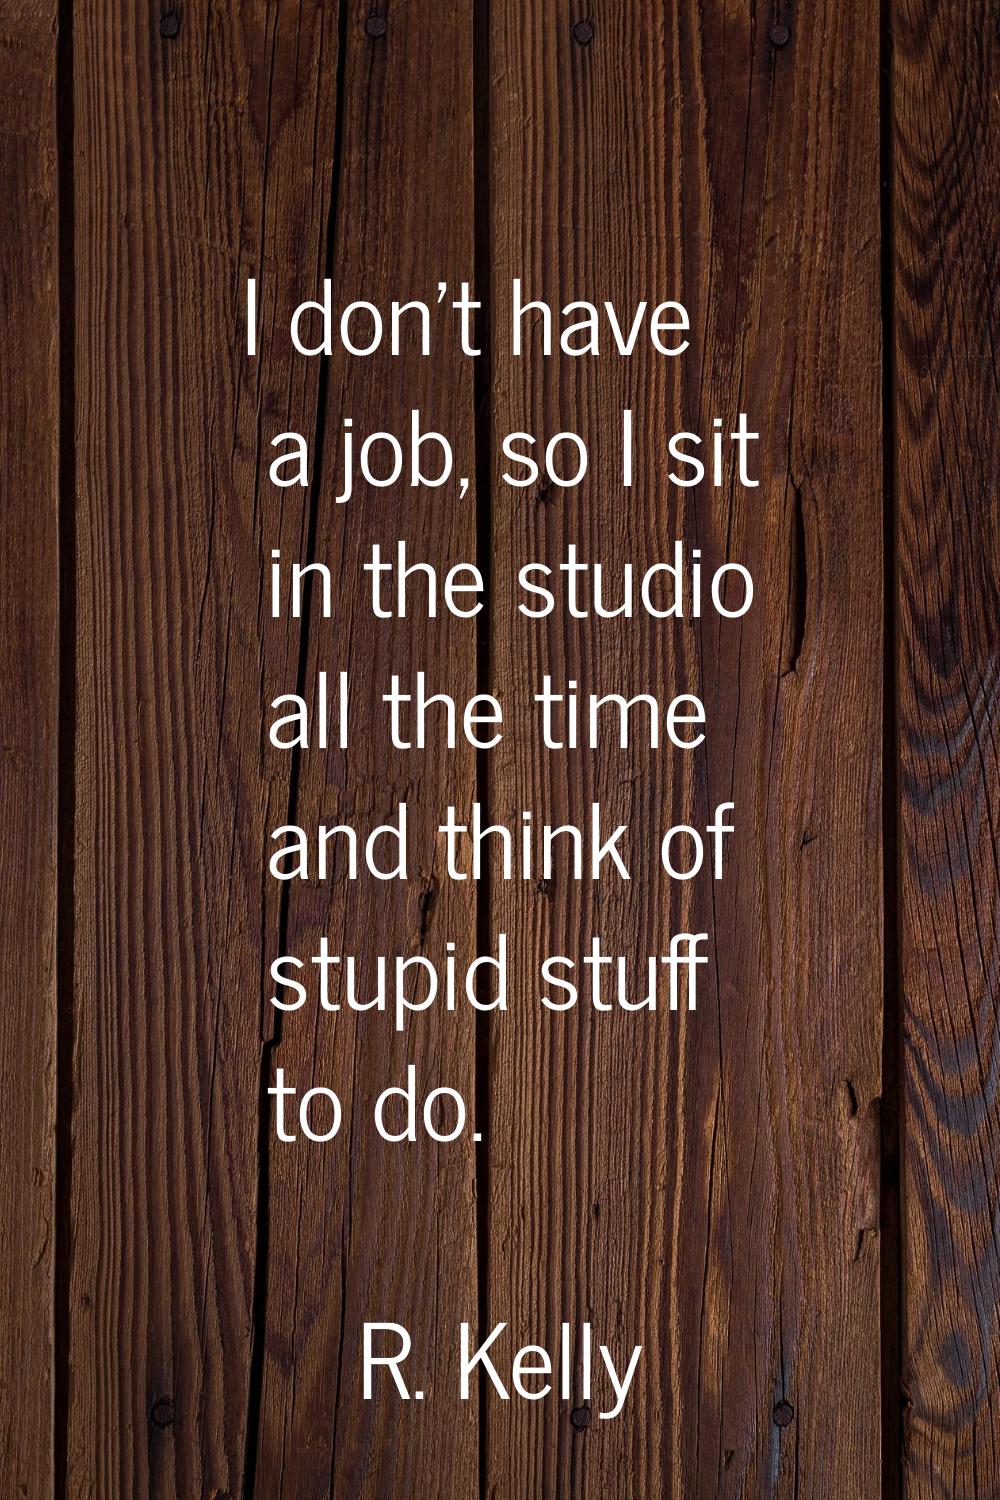 I don't have a job, so I sit in the studio all the time and think of stupid stuff to do.